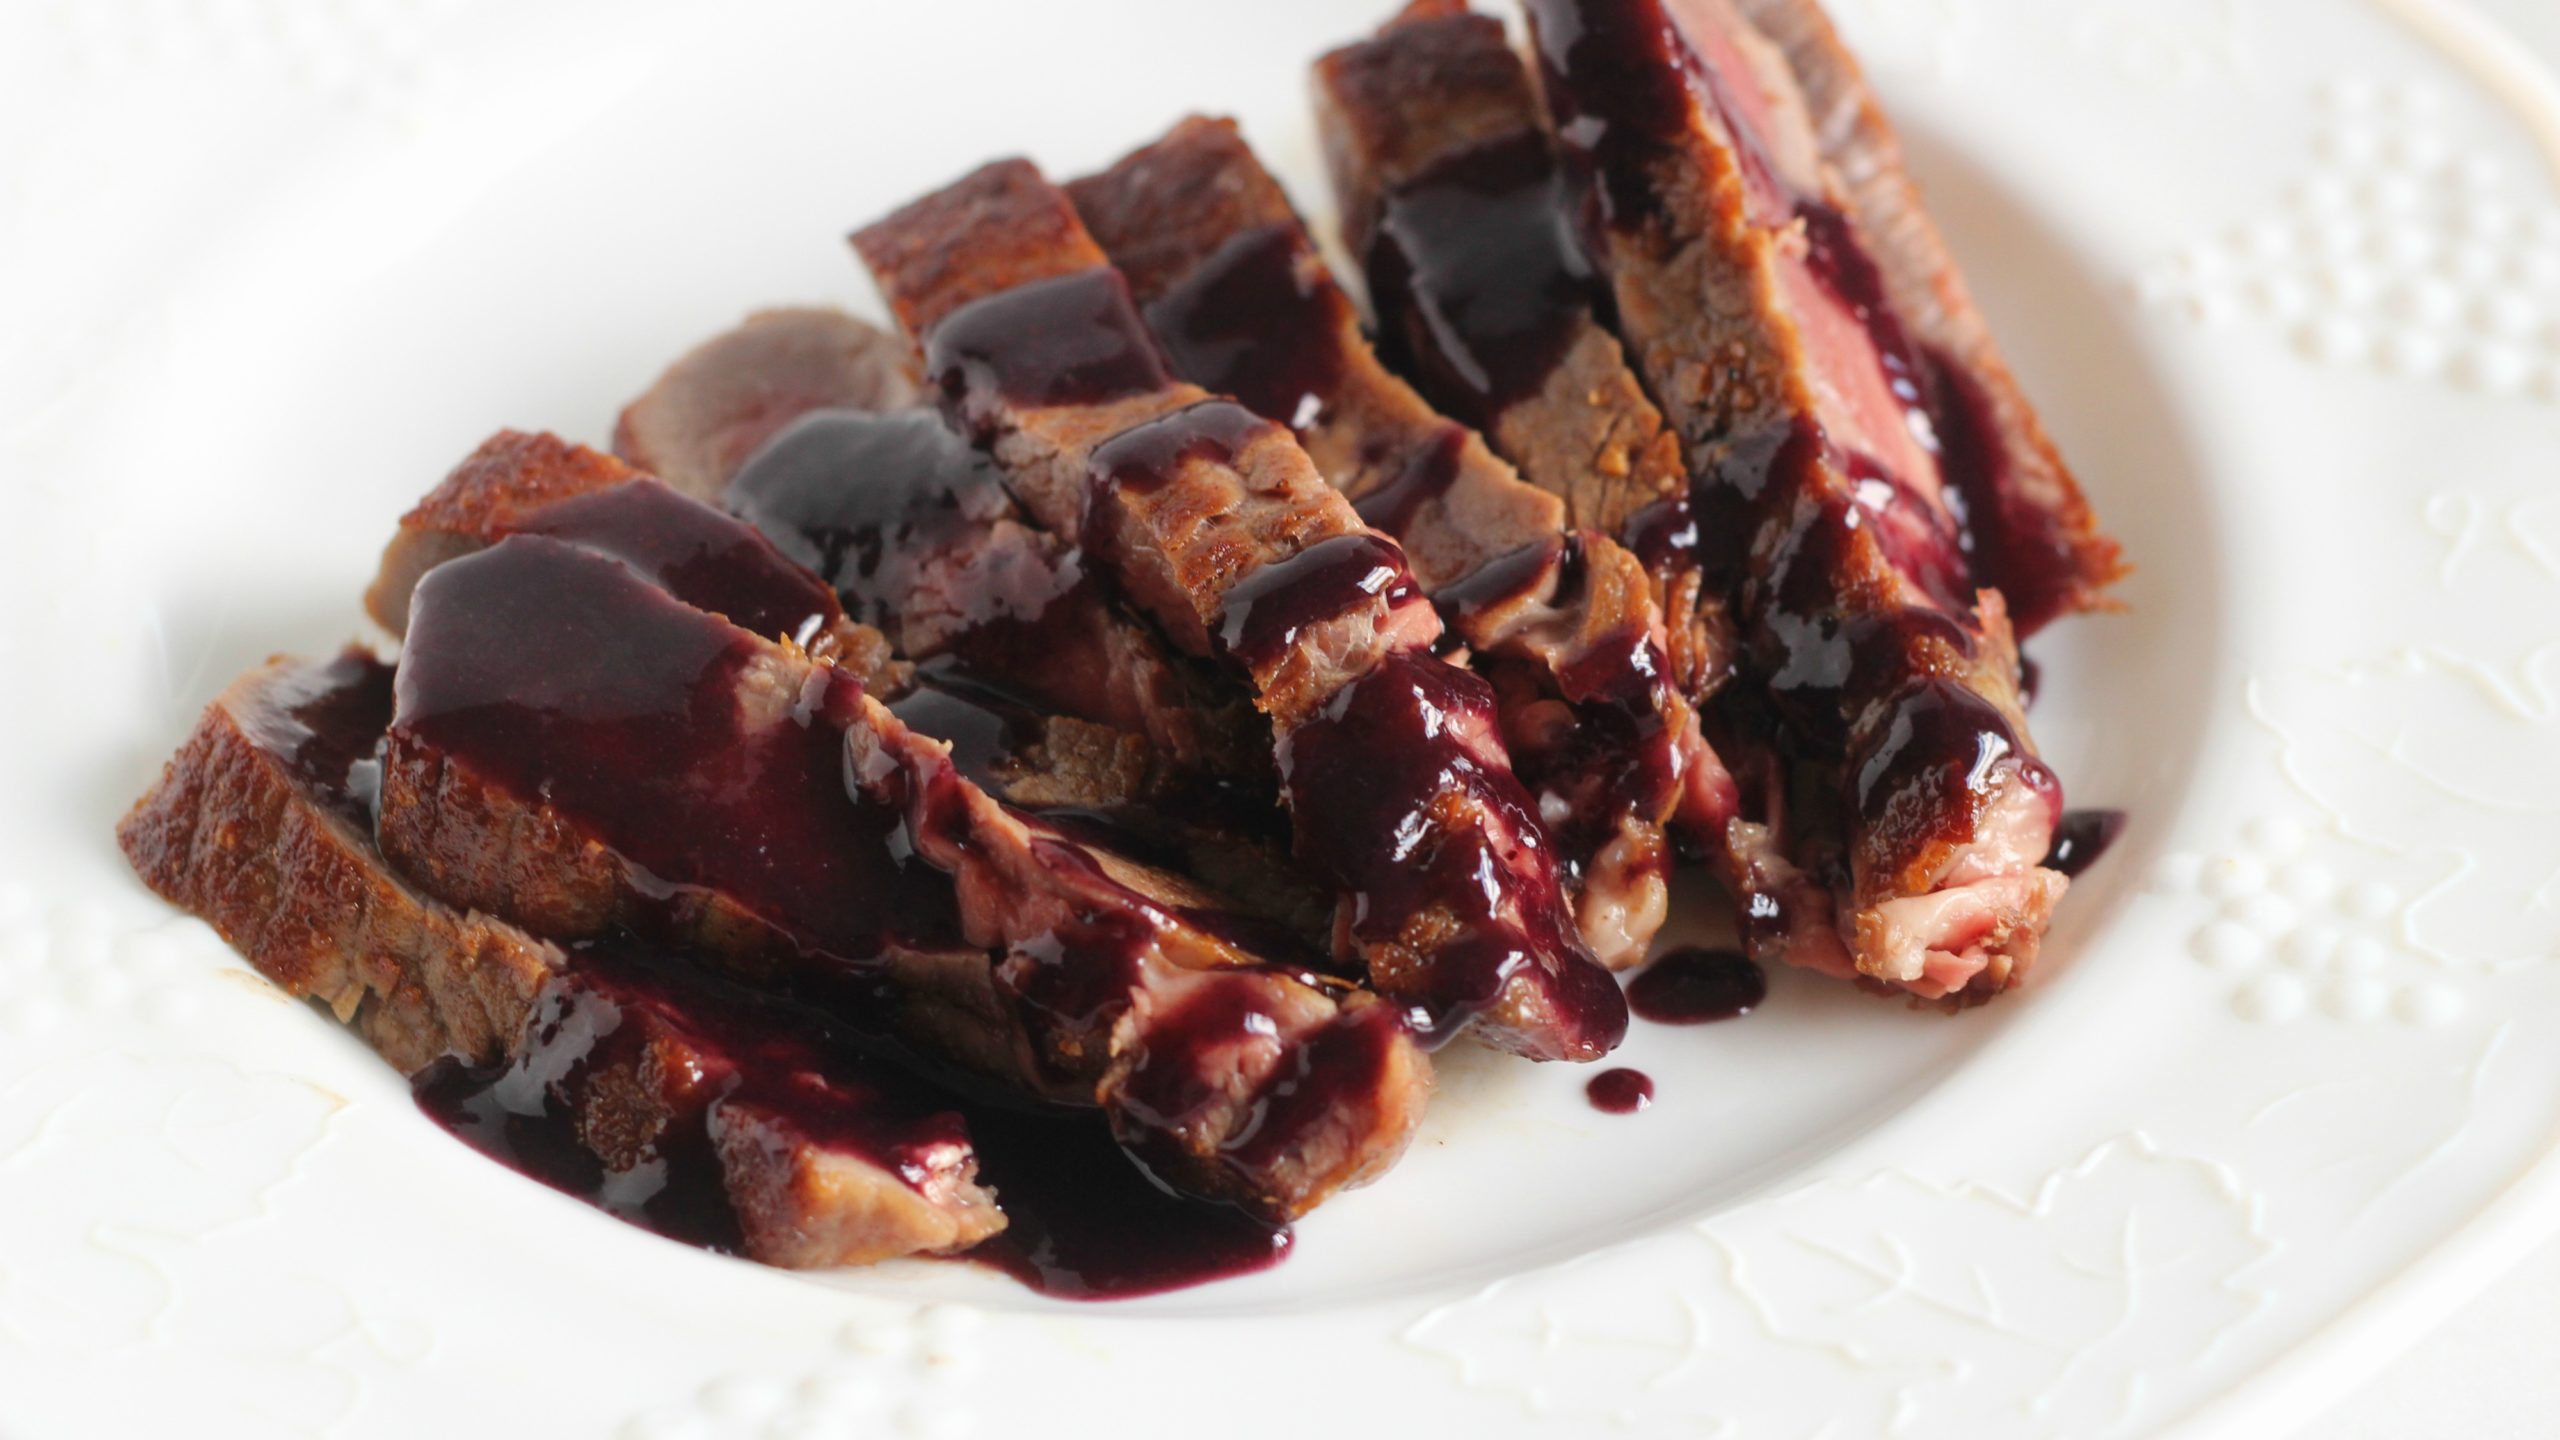 This Blueberry Pan Sauce Is Good On Any Meat